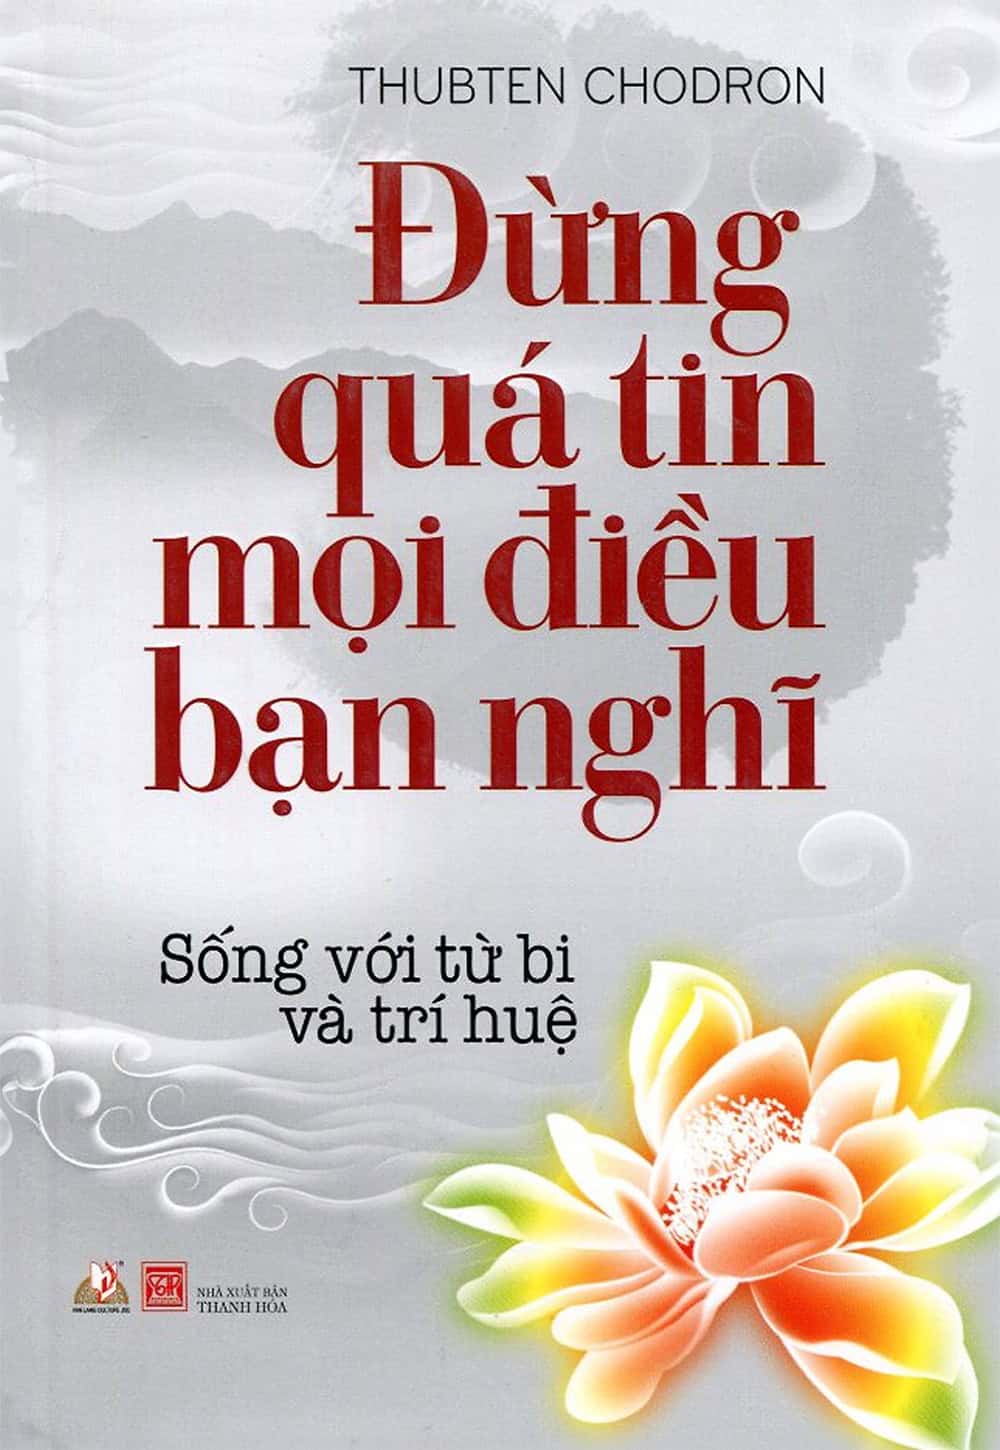 Cover of Vietnamese translation of "Don't Believe Everything You Think"